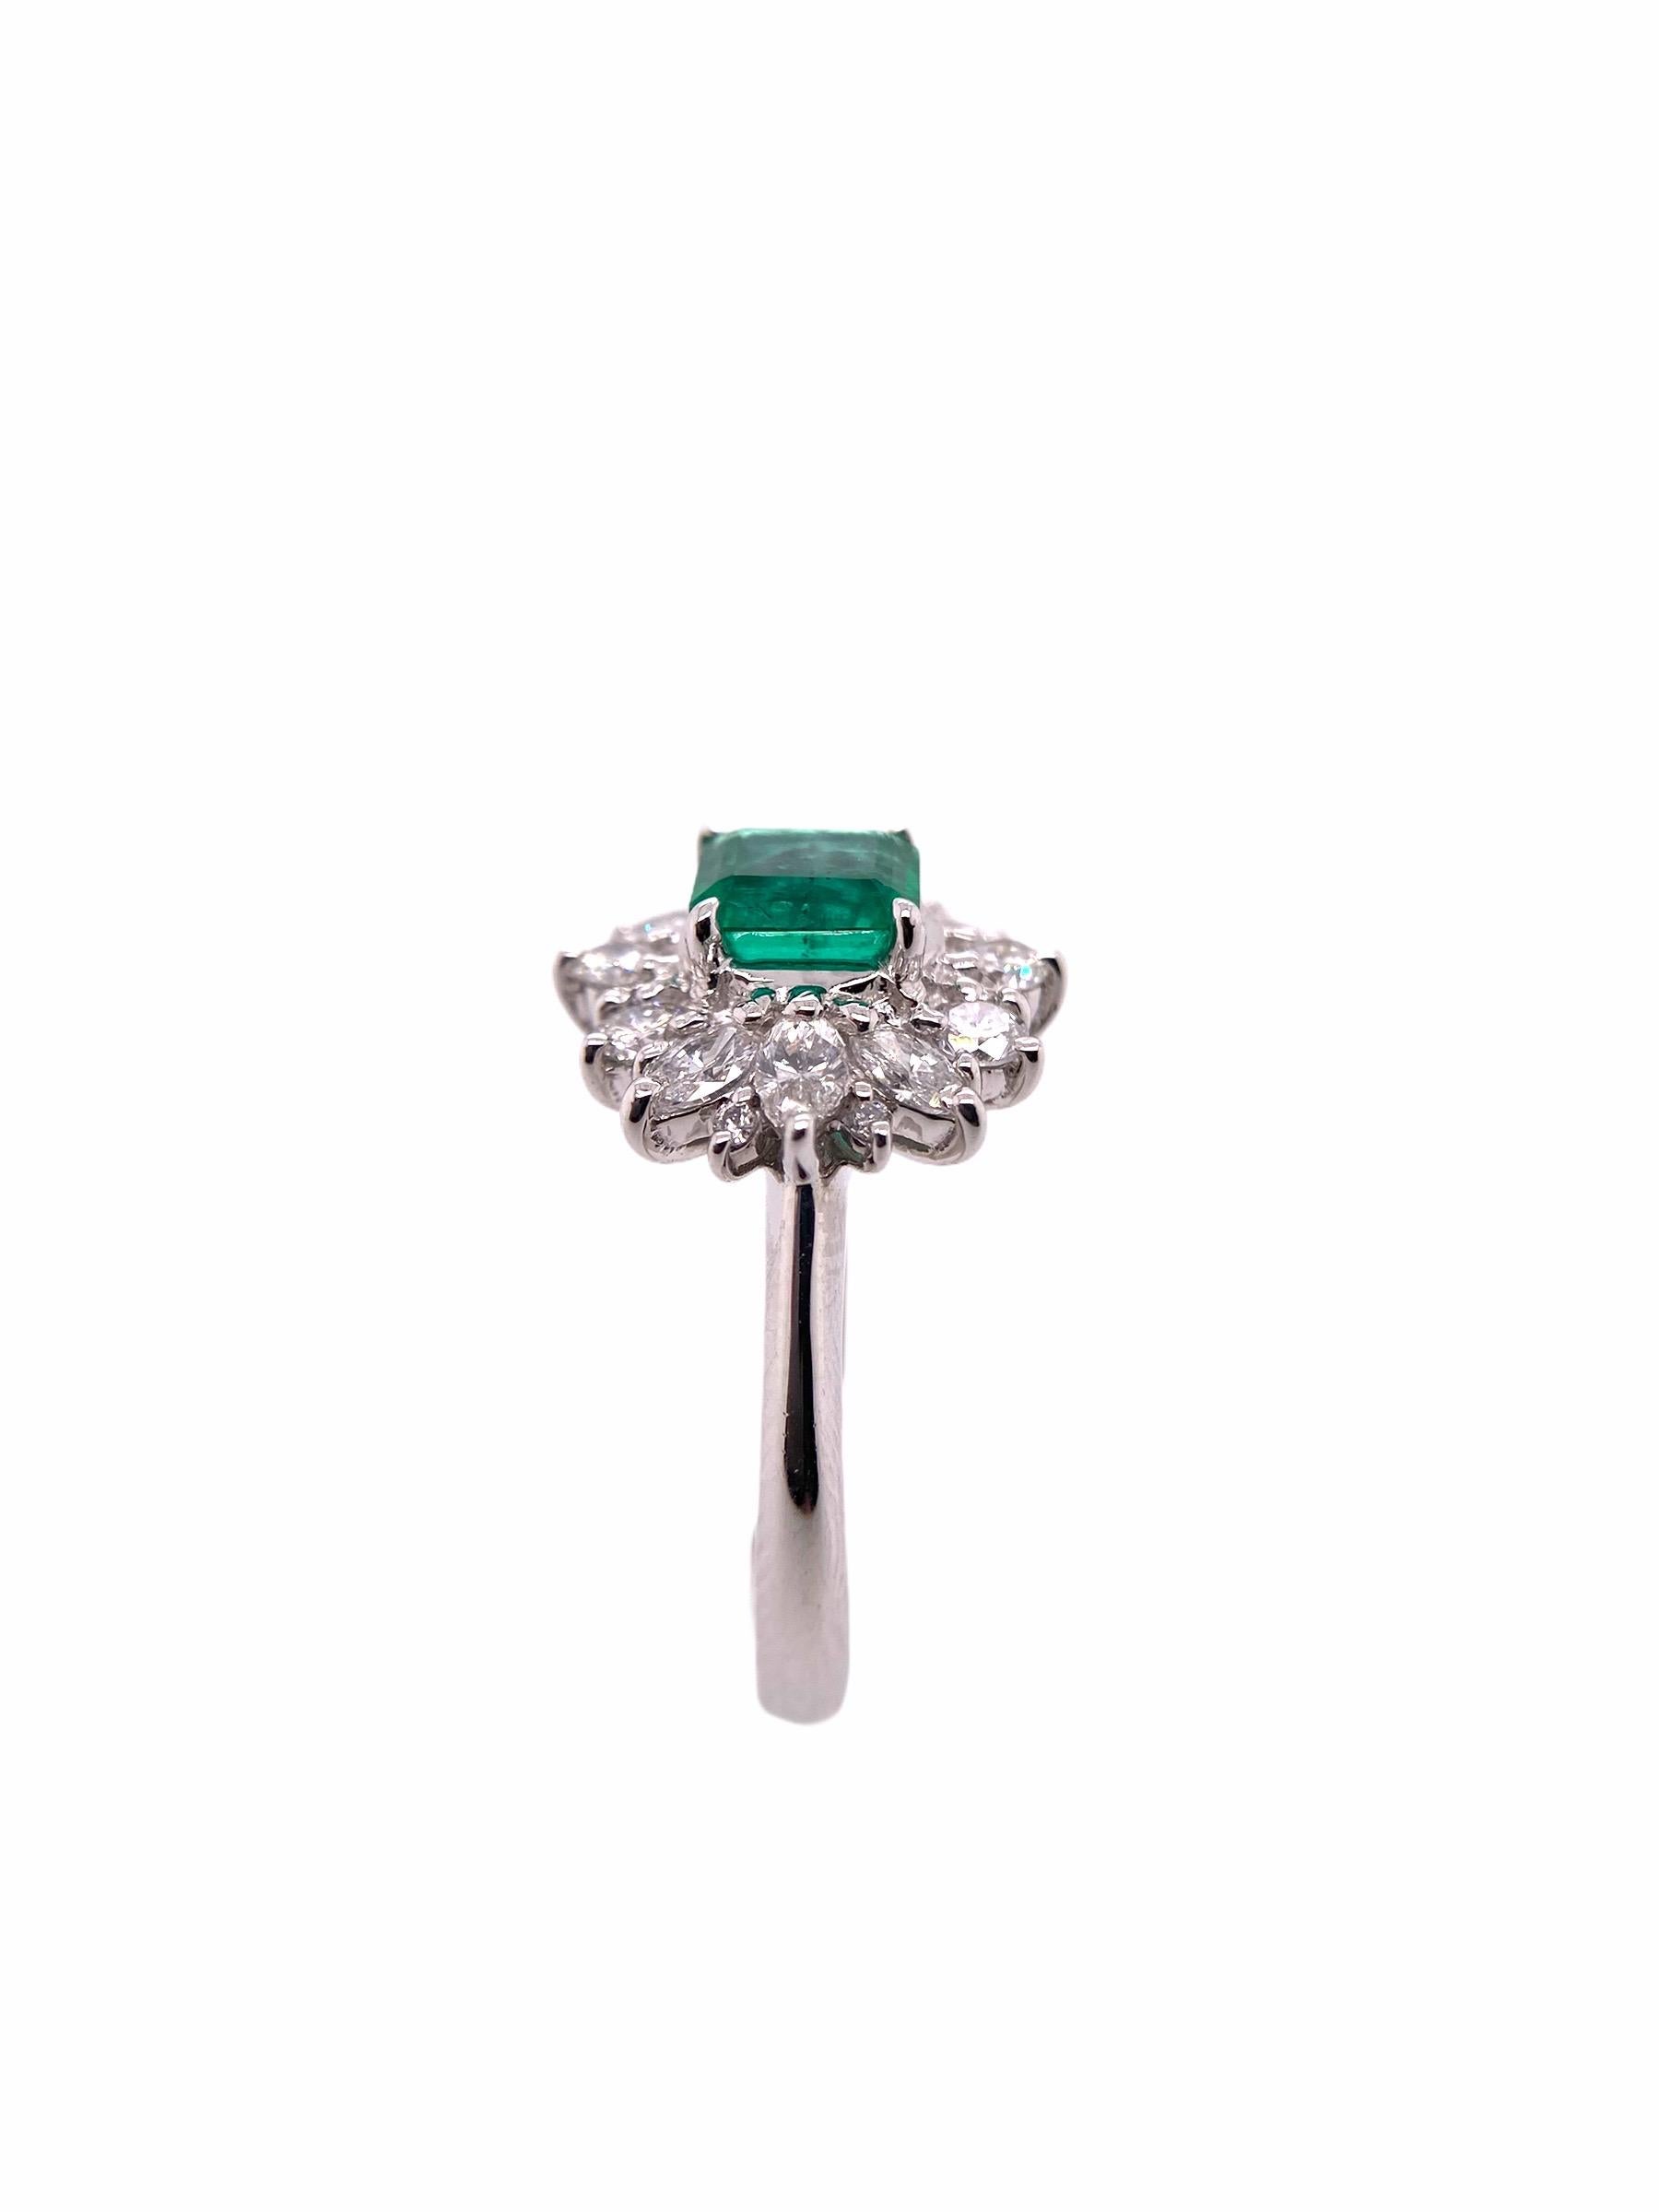 PARIS Craft House one-of-one Emerald Diamond Ring. Crafted in Platinum showcasing local classic craftsmanship, the ring is crowned with an Oval-cut Emerald at the center of attraction. Matching Marquise-cut Diamonds were then hand selected before